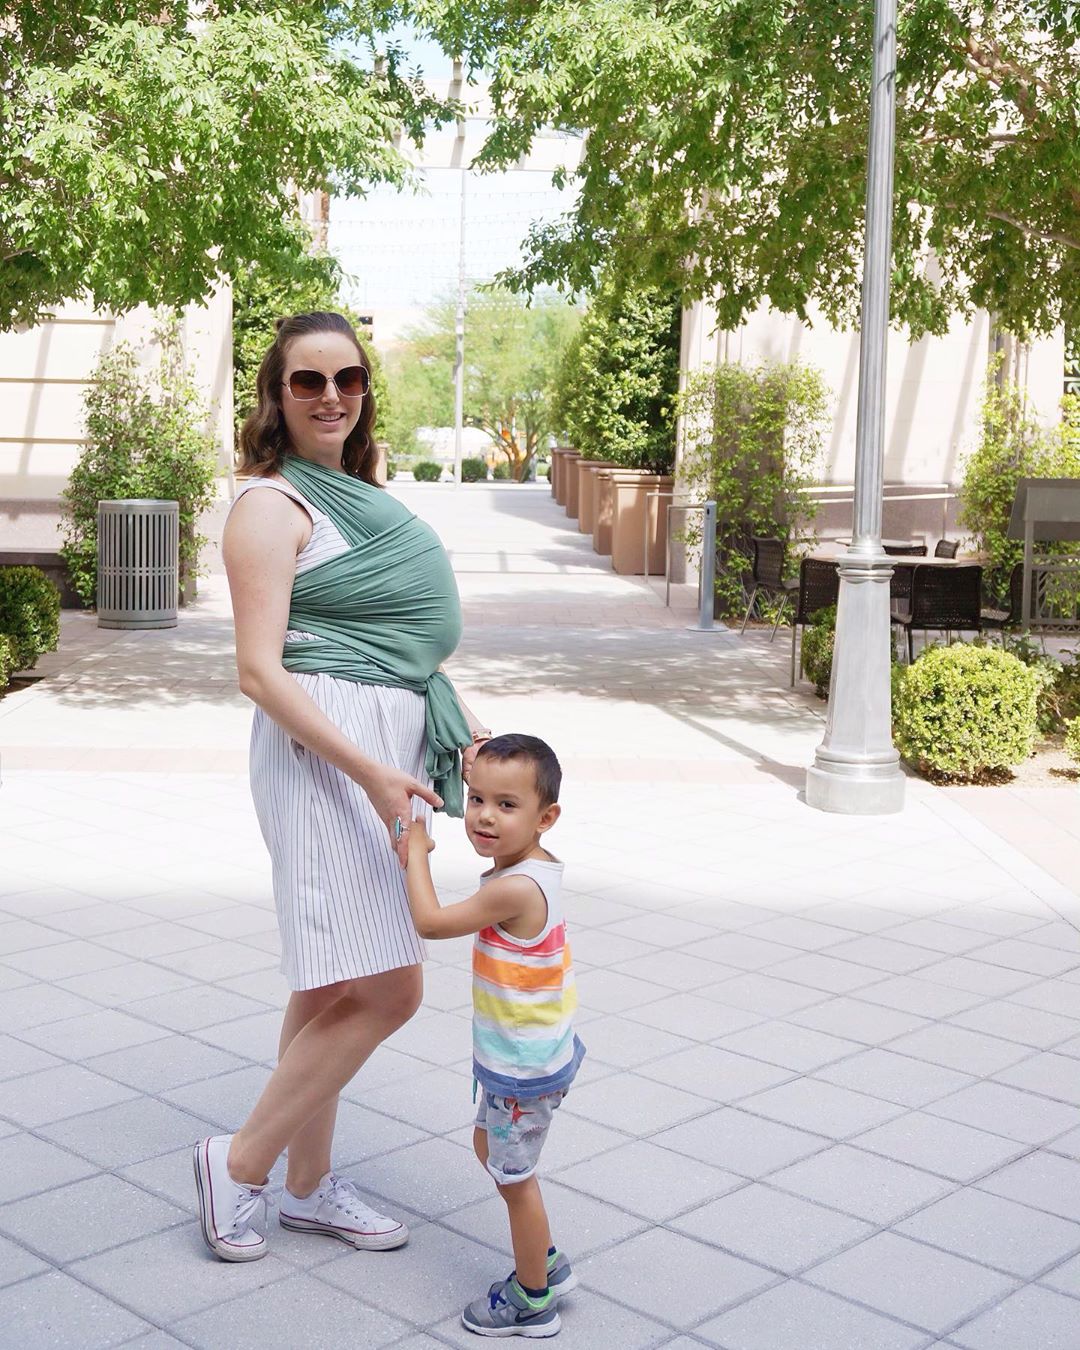 Mom carrying baby and walking with son. Photo by Instagram user @kathleen.ordinario